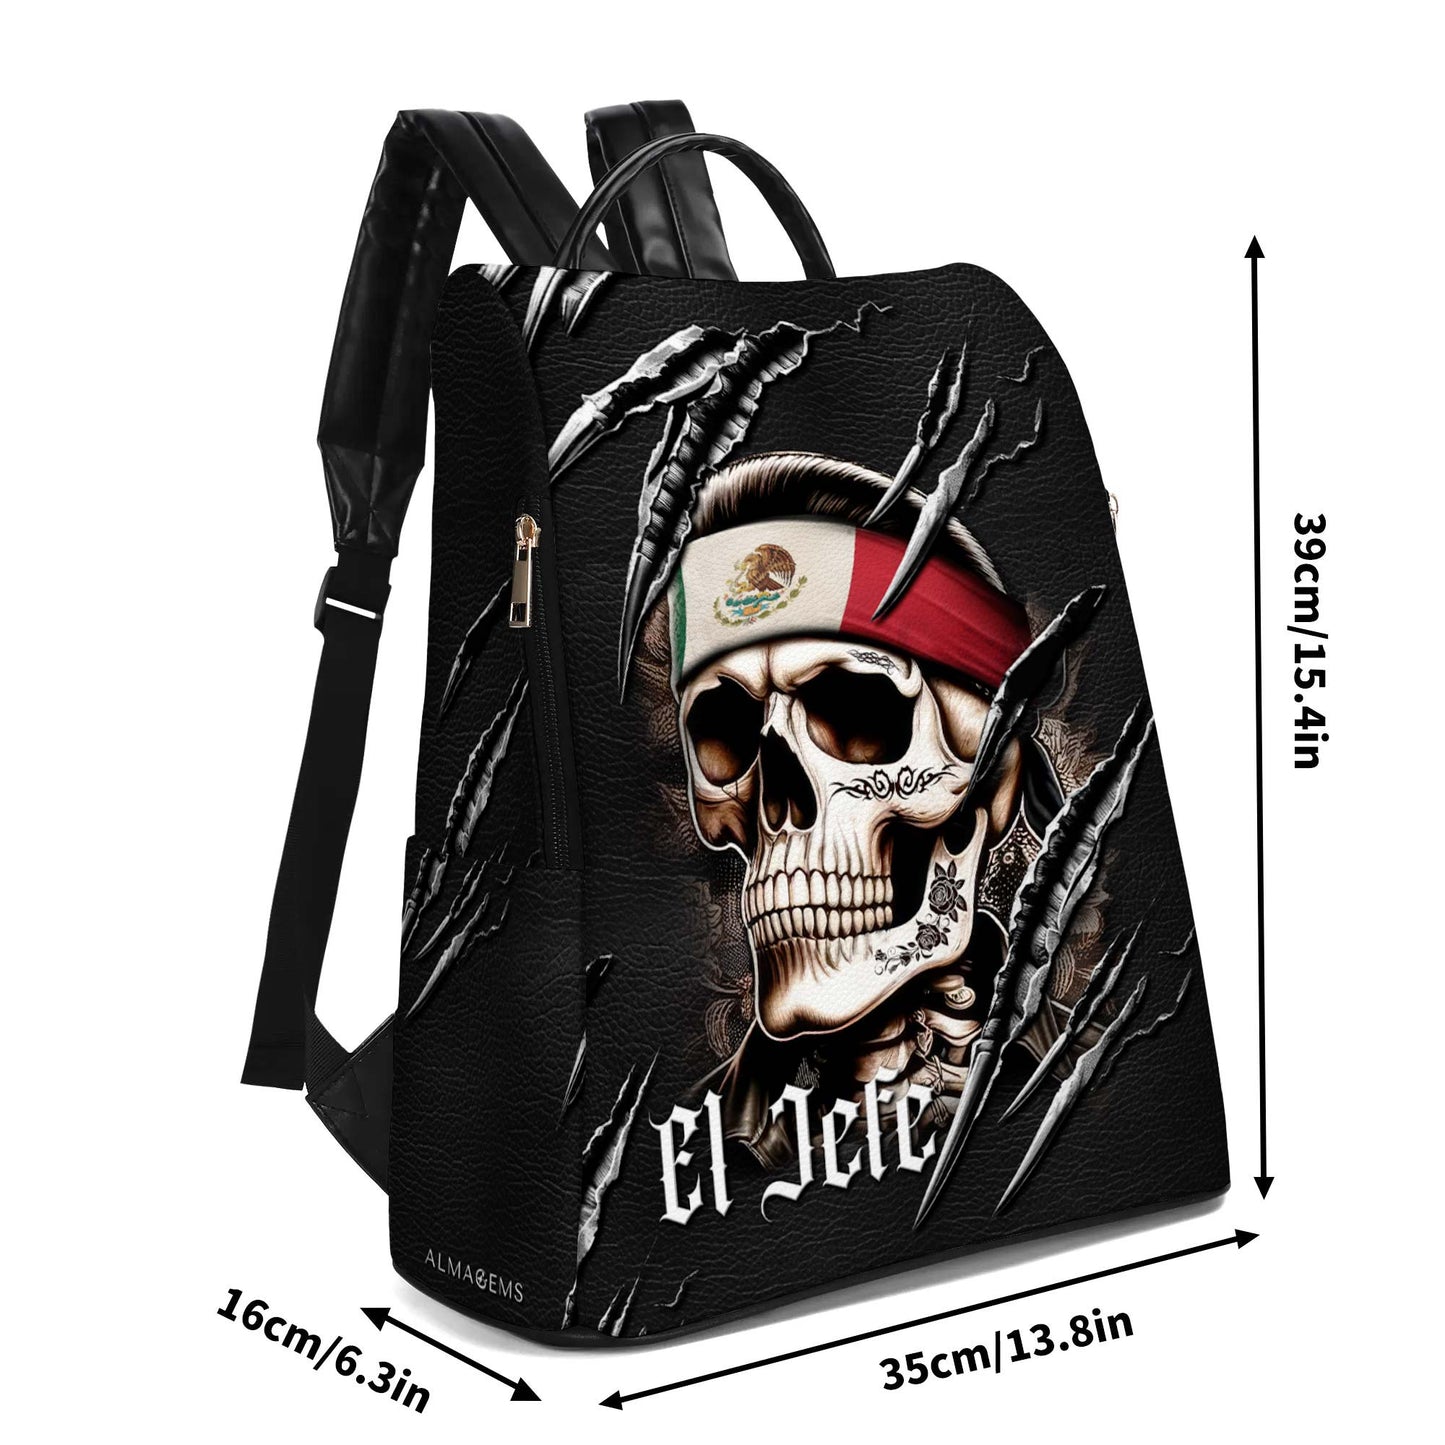 El Jefe - Personalized Leather BackPack - BP_MX03